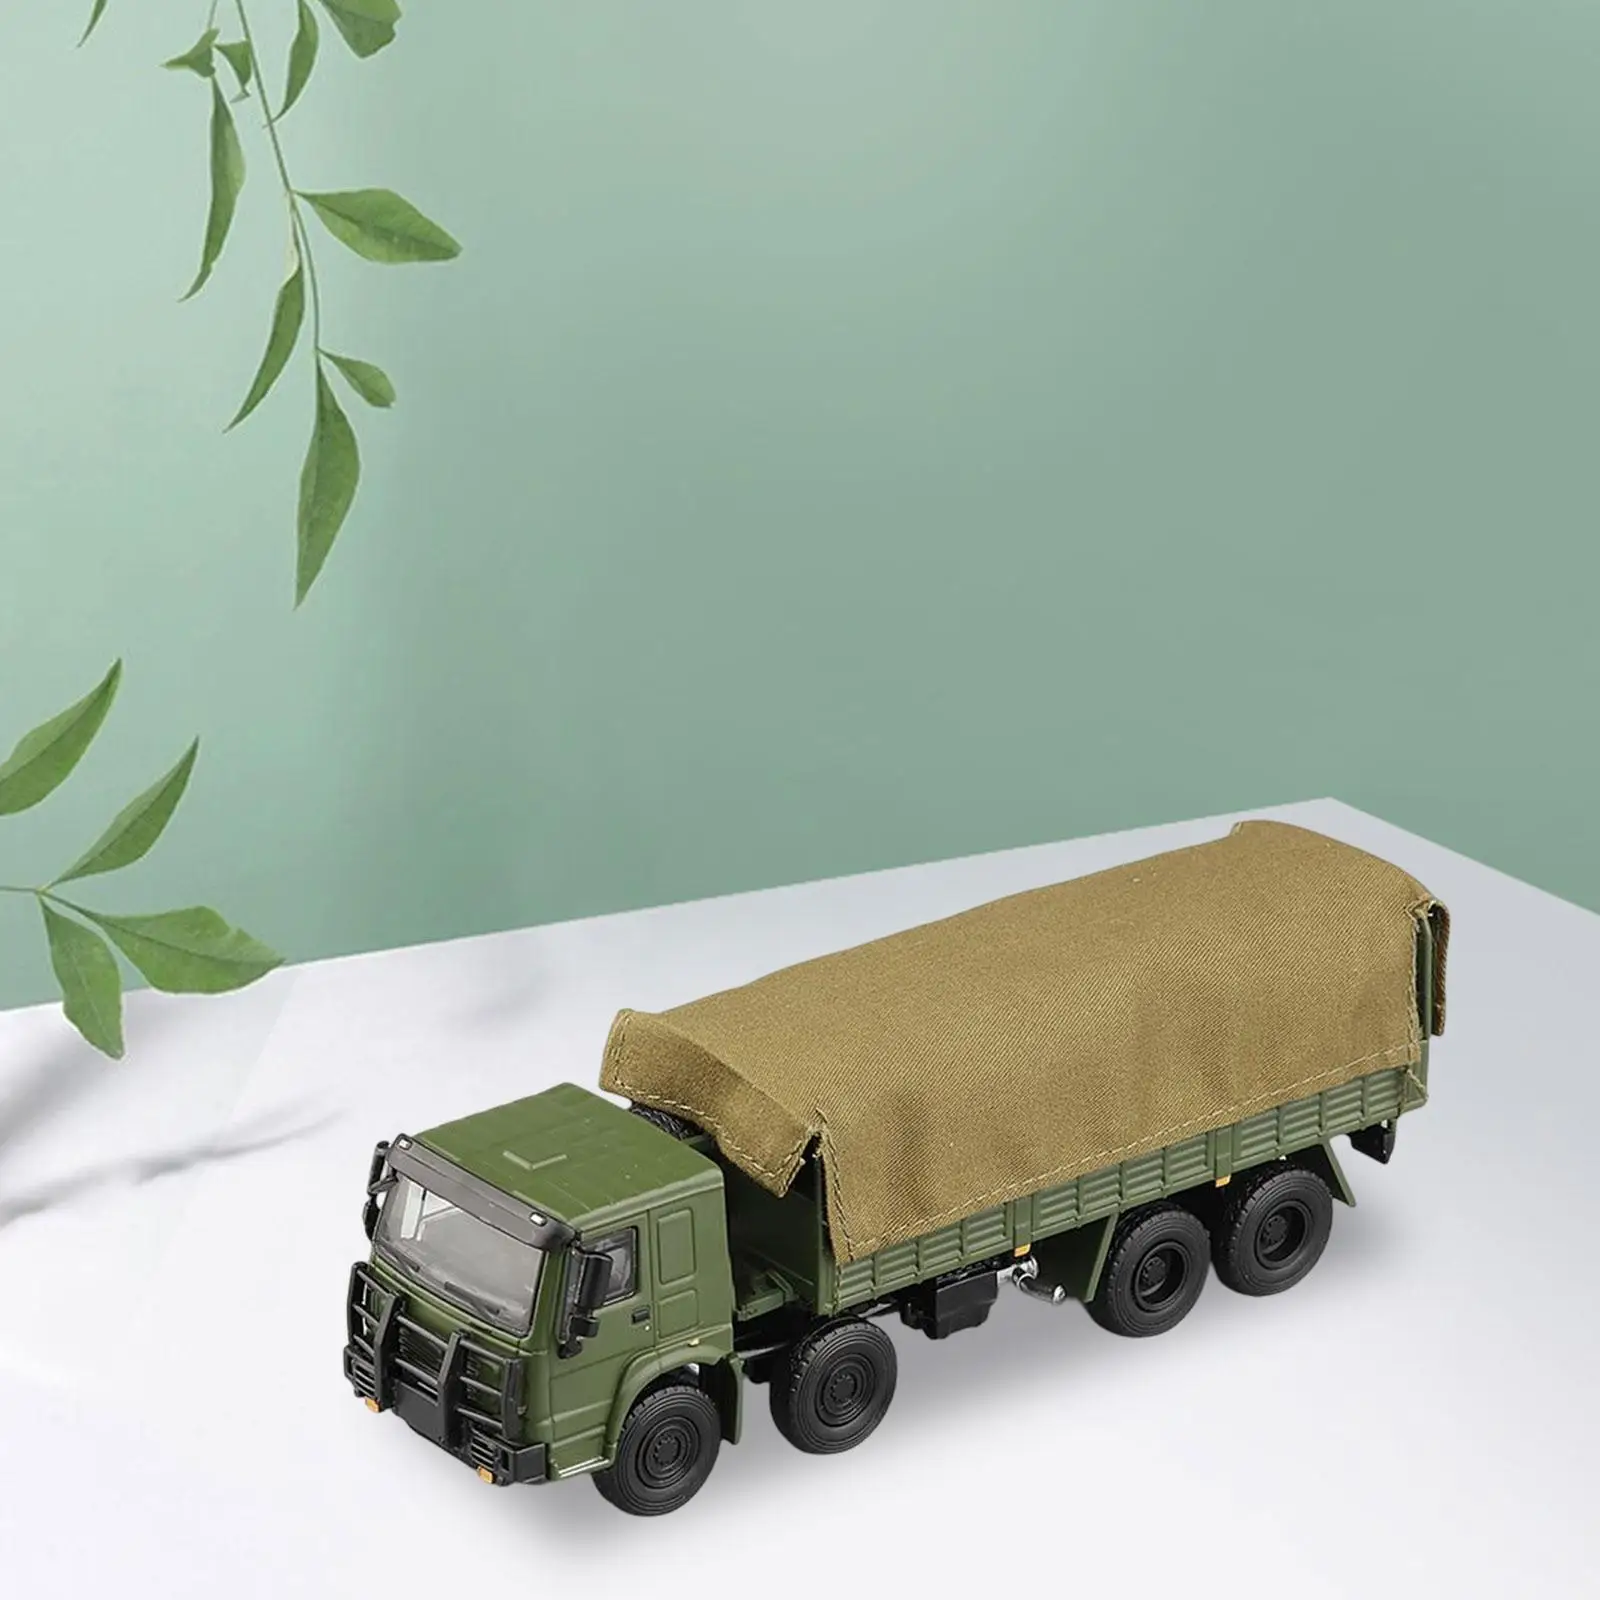 1/64 Car Model Sand Table Ornament Collection Mini Vehicles Toys for Miniature Scene Diorama Photography Props Decoration Layout